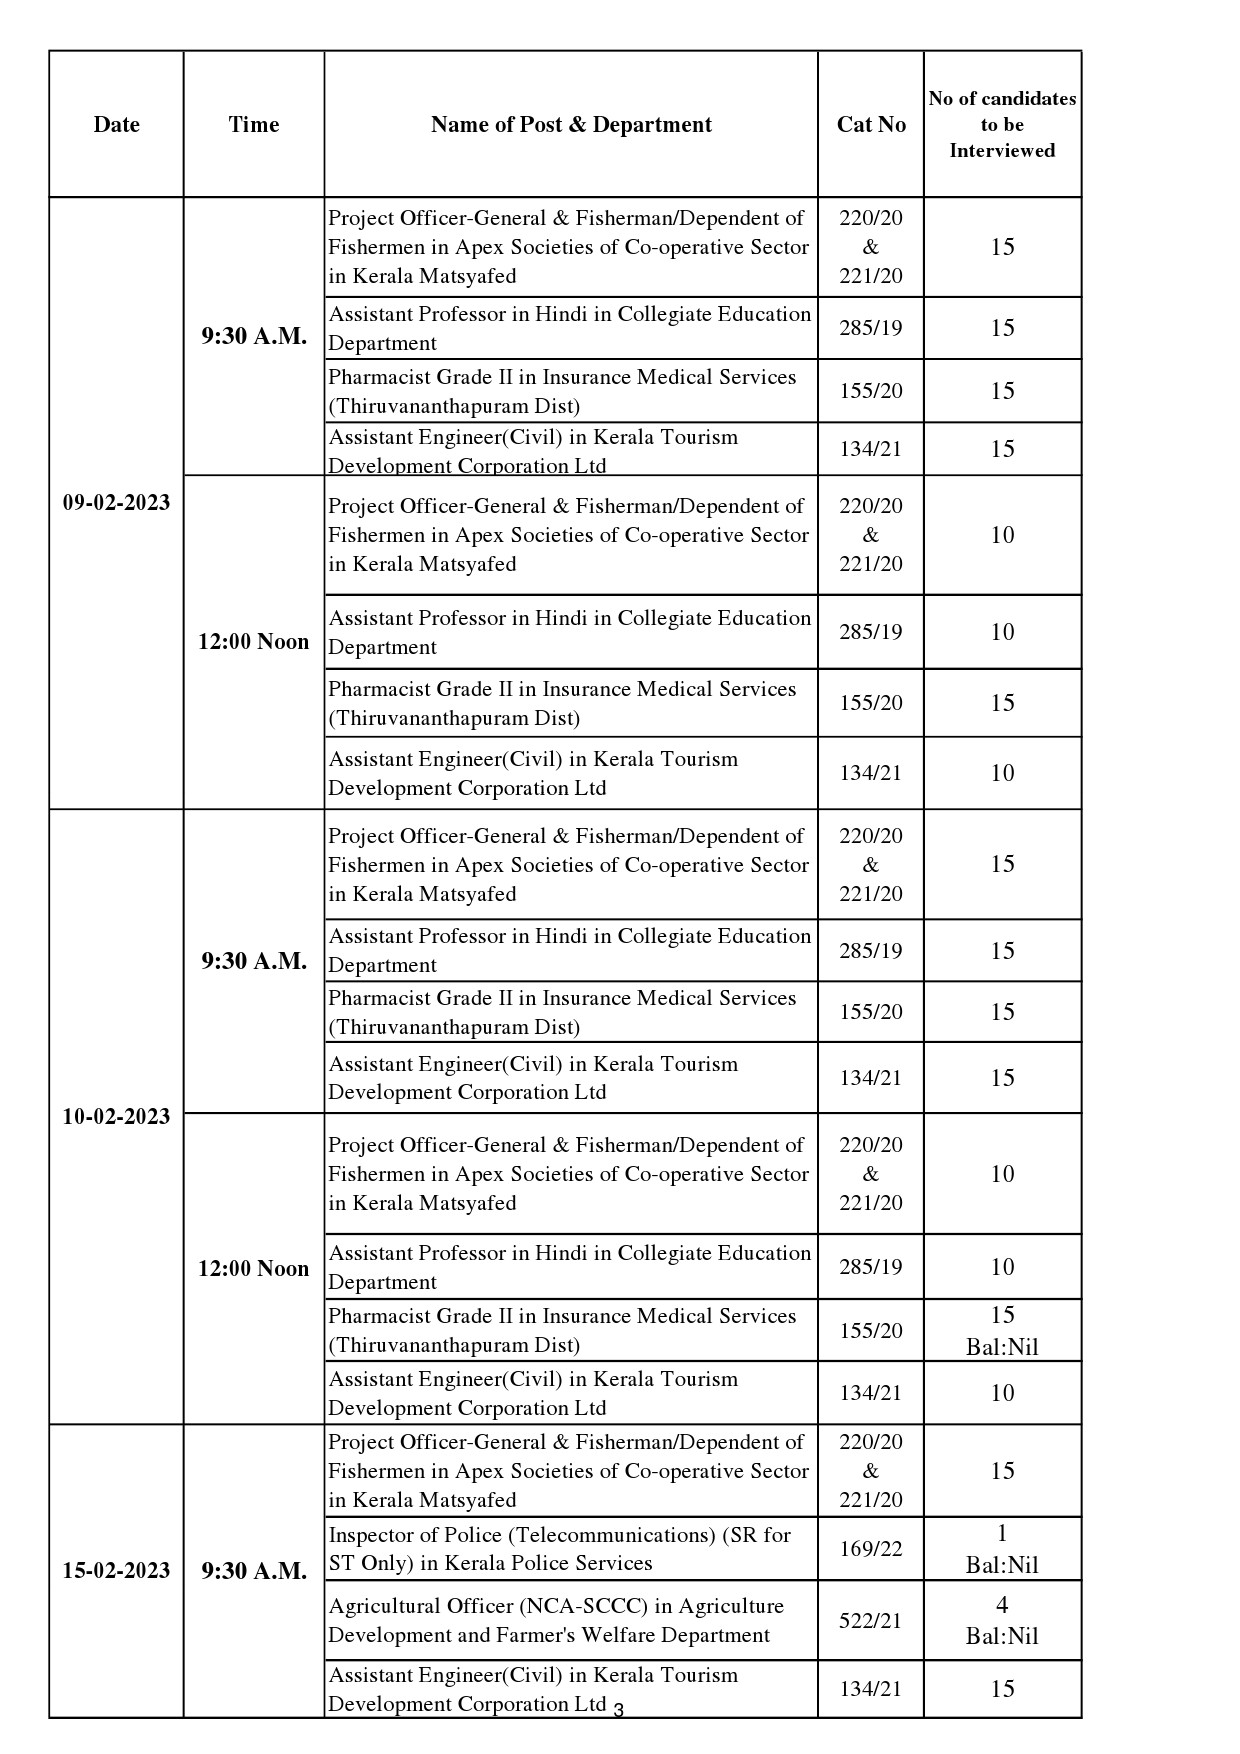 KPSC Interview Programme For The Month Of February 2023 - Notification Image 3